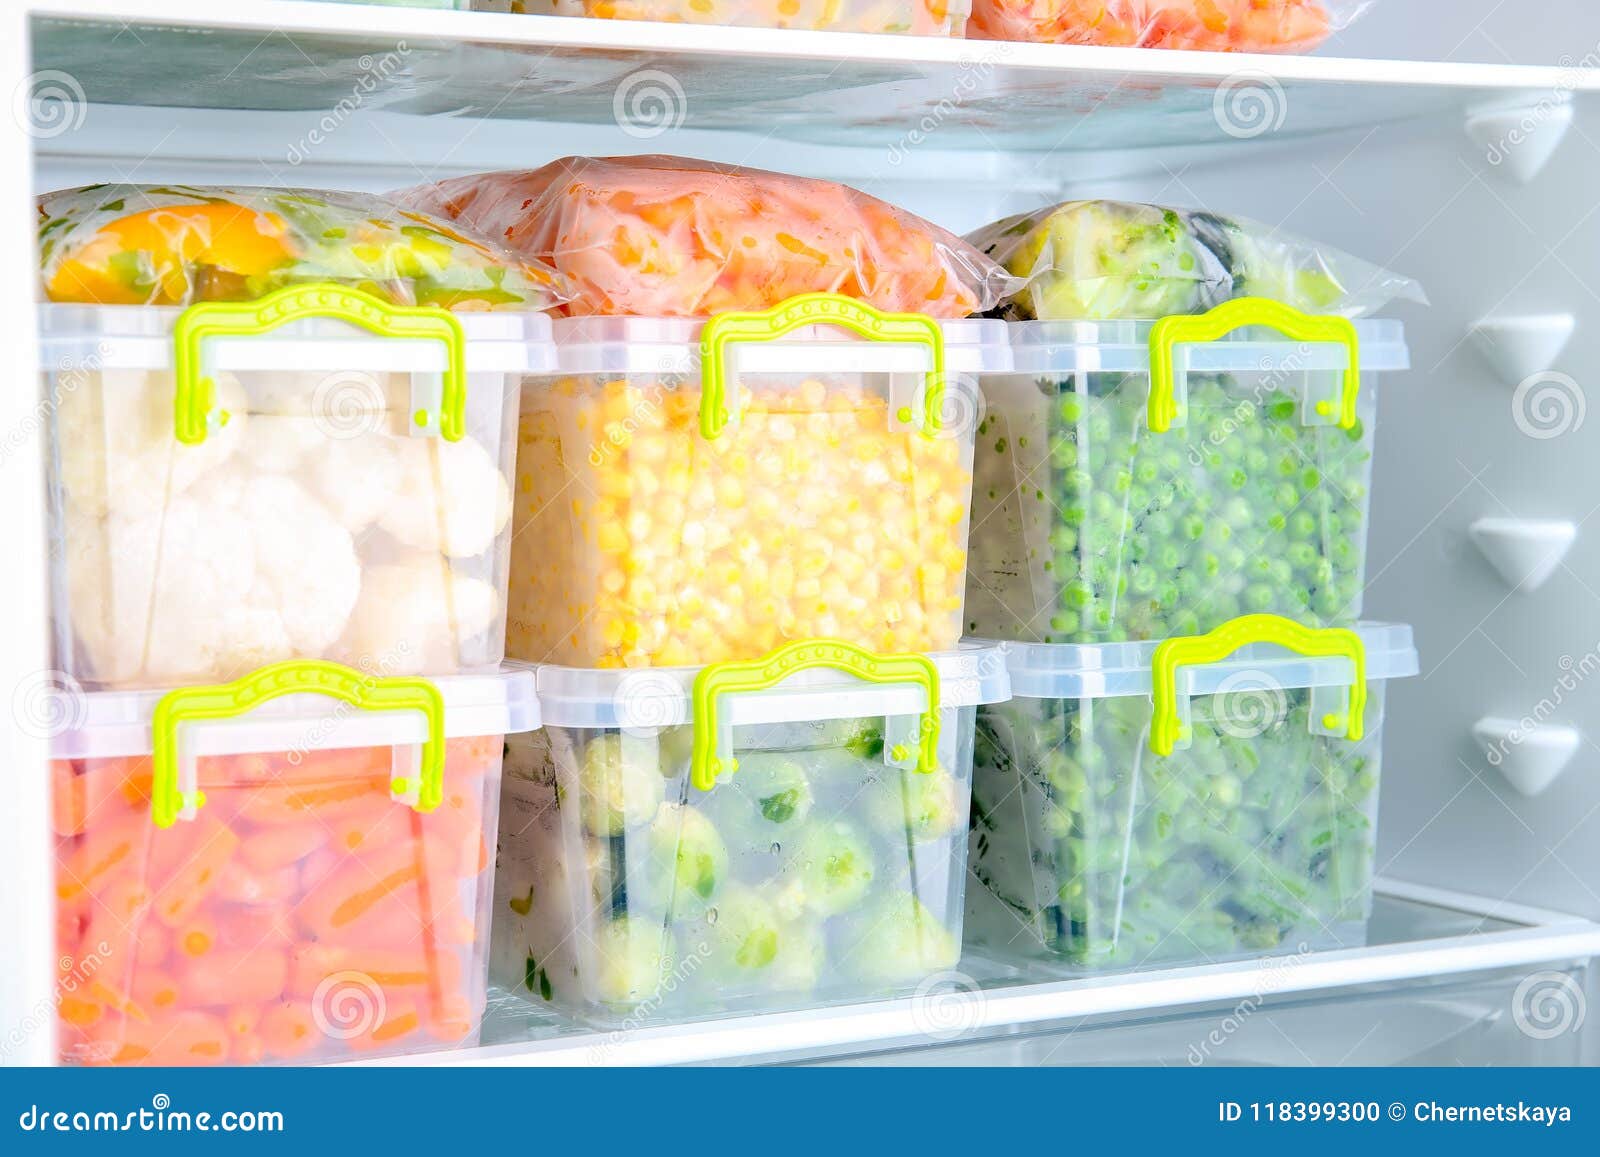 plastic containers with deep frozen vegetables in refrigerator